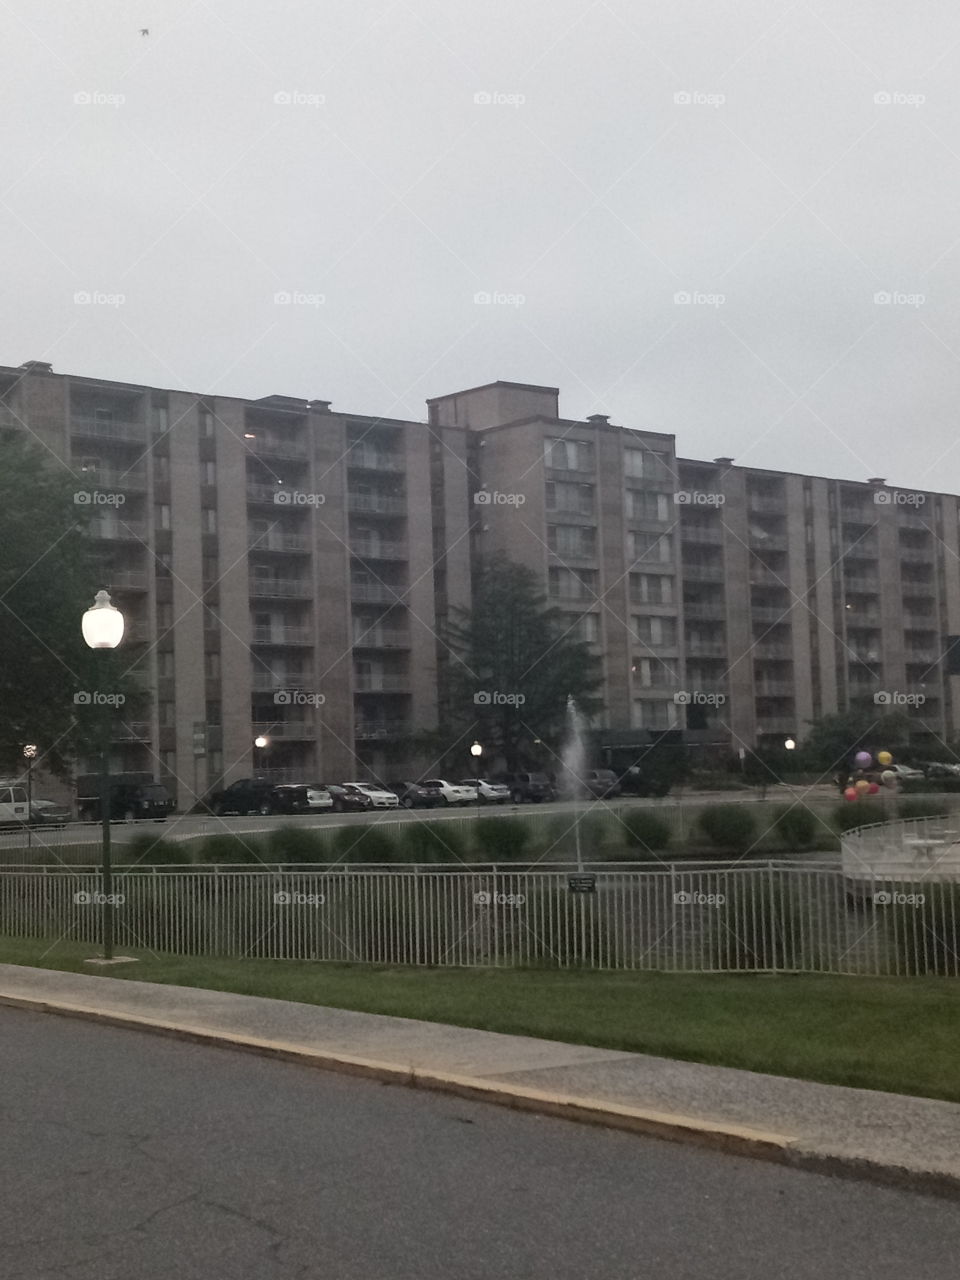 one of the buildings in my complex